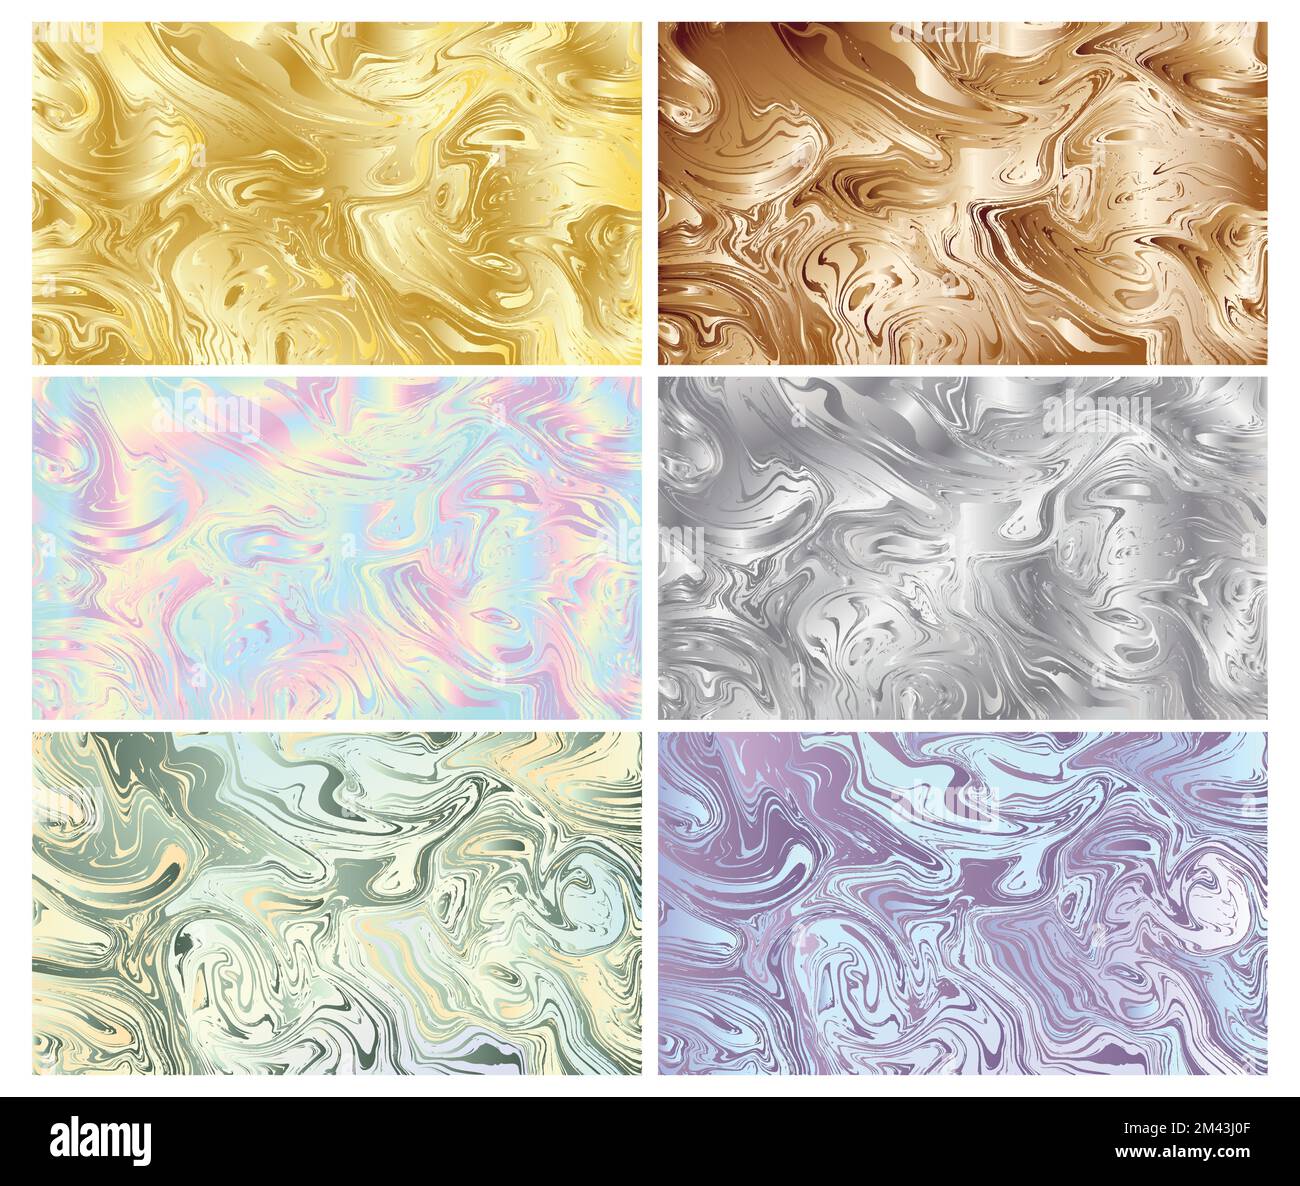 Set of six liquid metals, marble and holographic foil backgrounds Stock Vector